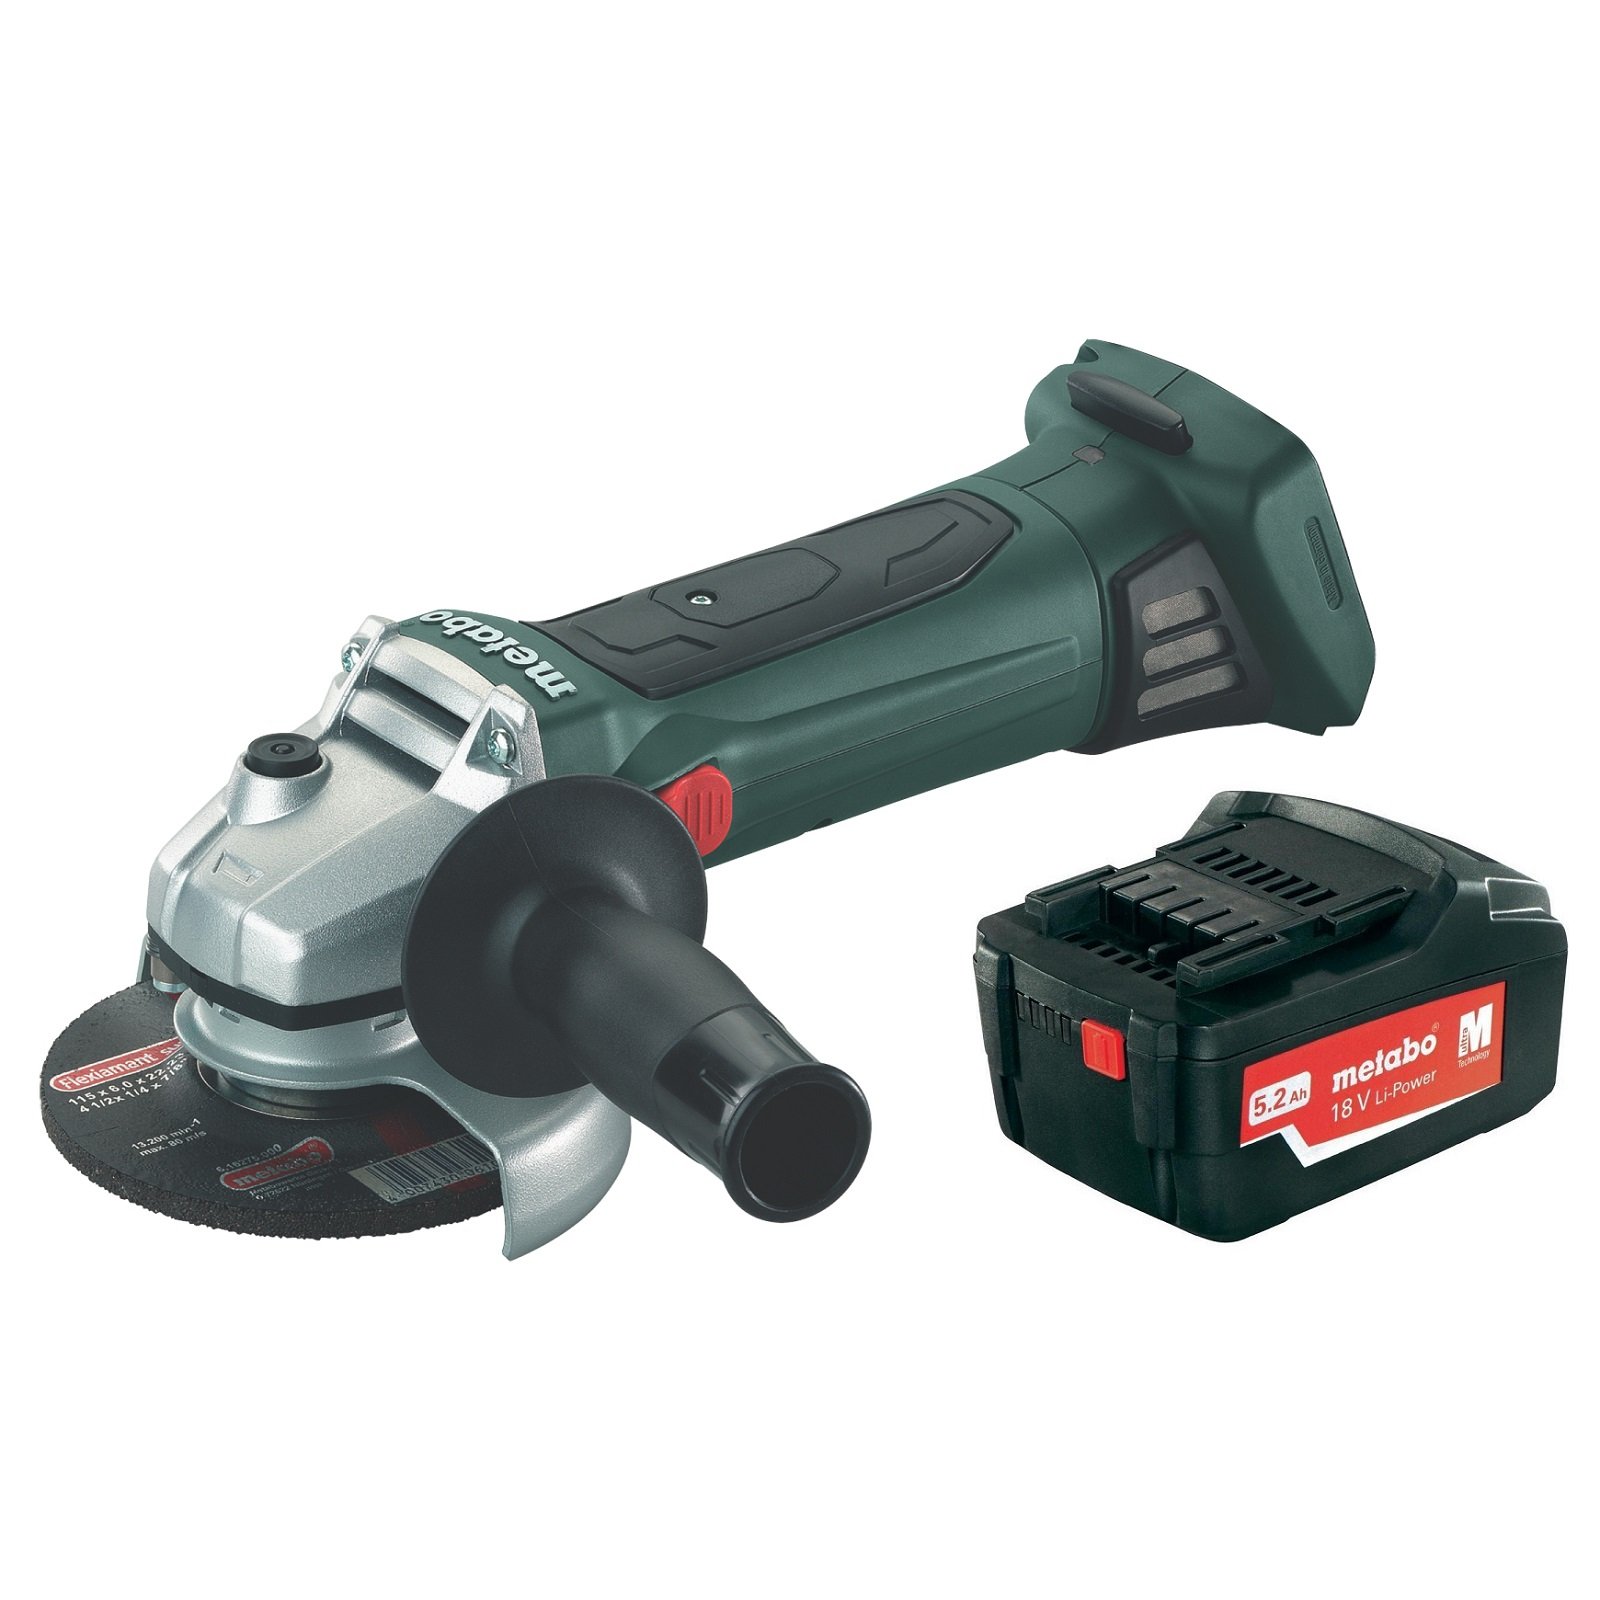 Metabo 18 Volt 125mm Cordless Angle Grinder Bare Tool W 18 LTX W 18 SK Plus Battery 6.02174.85+6.25592